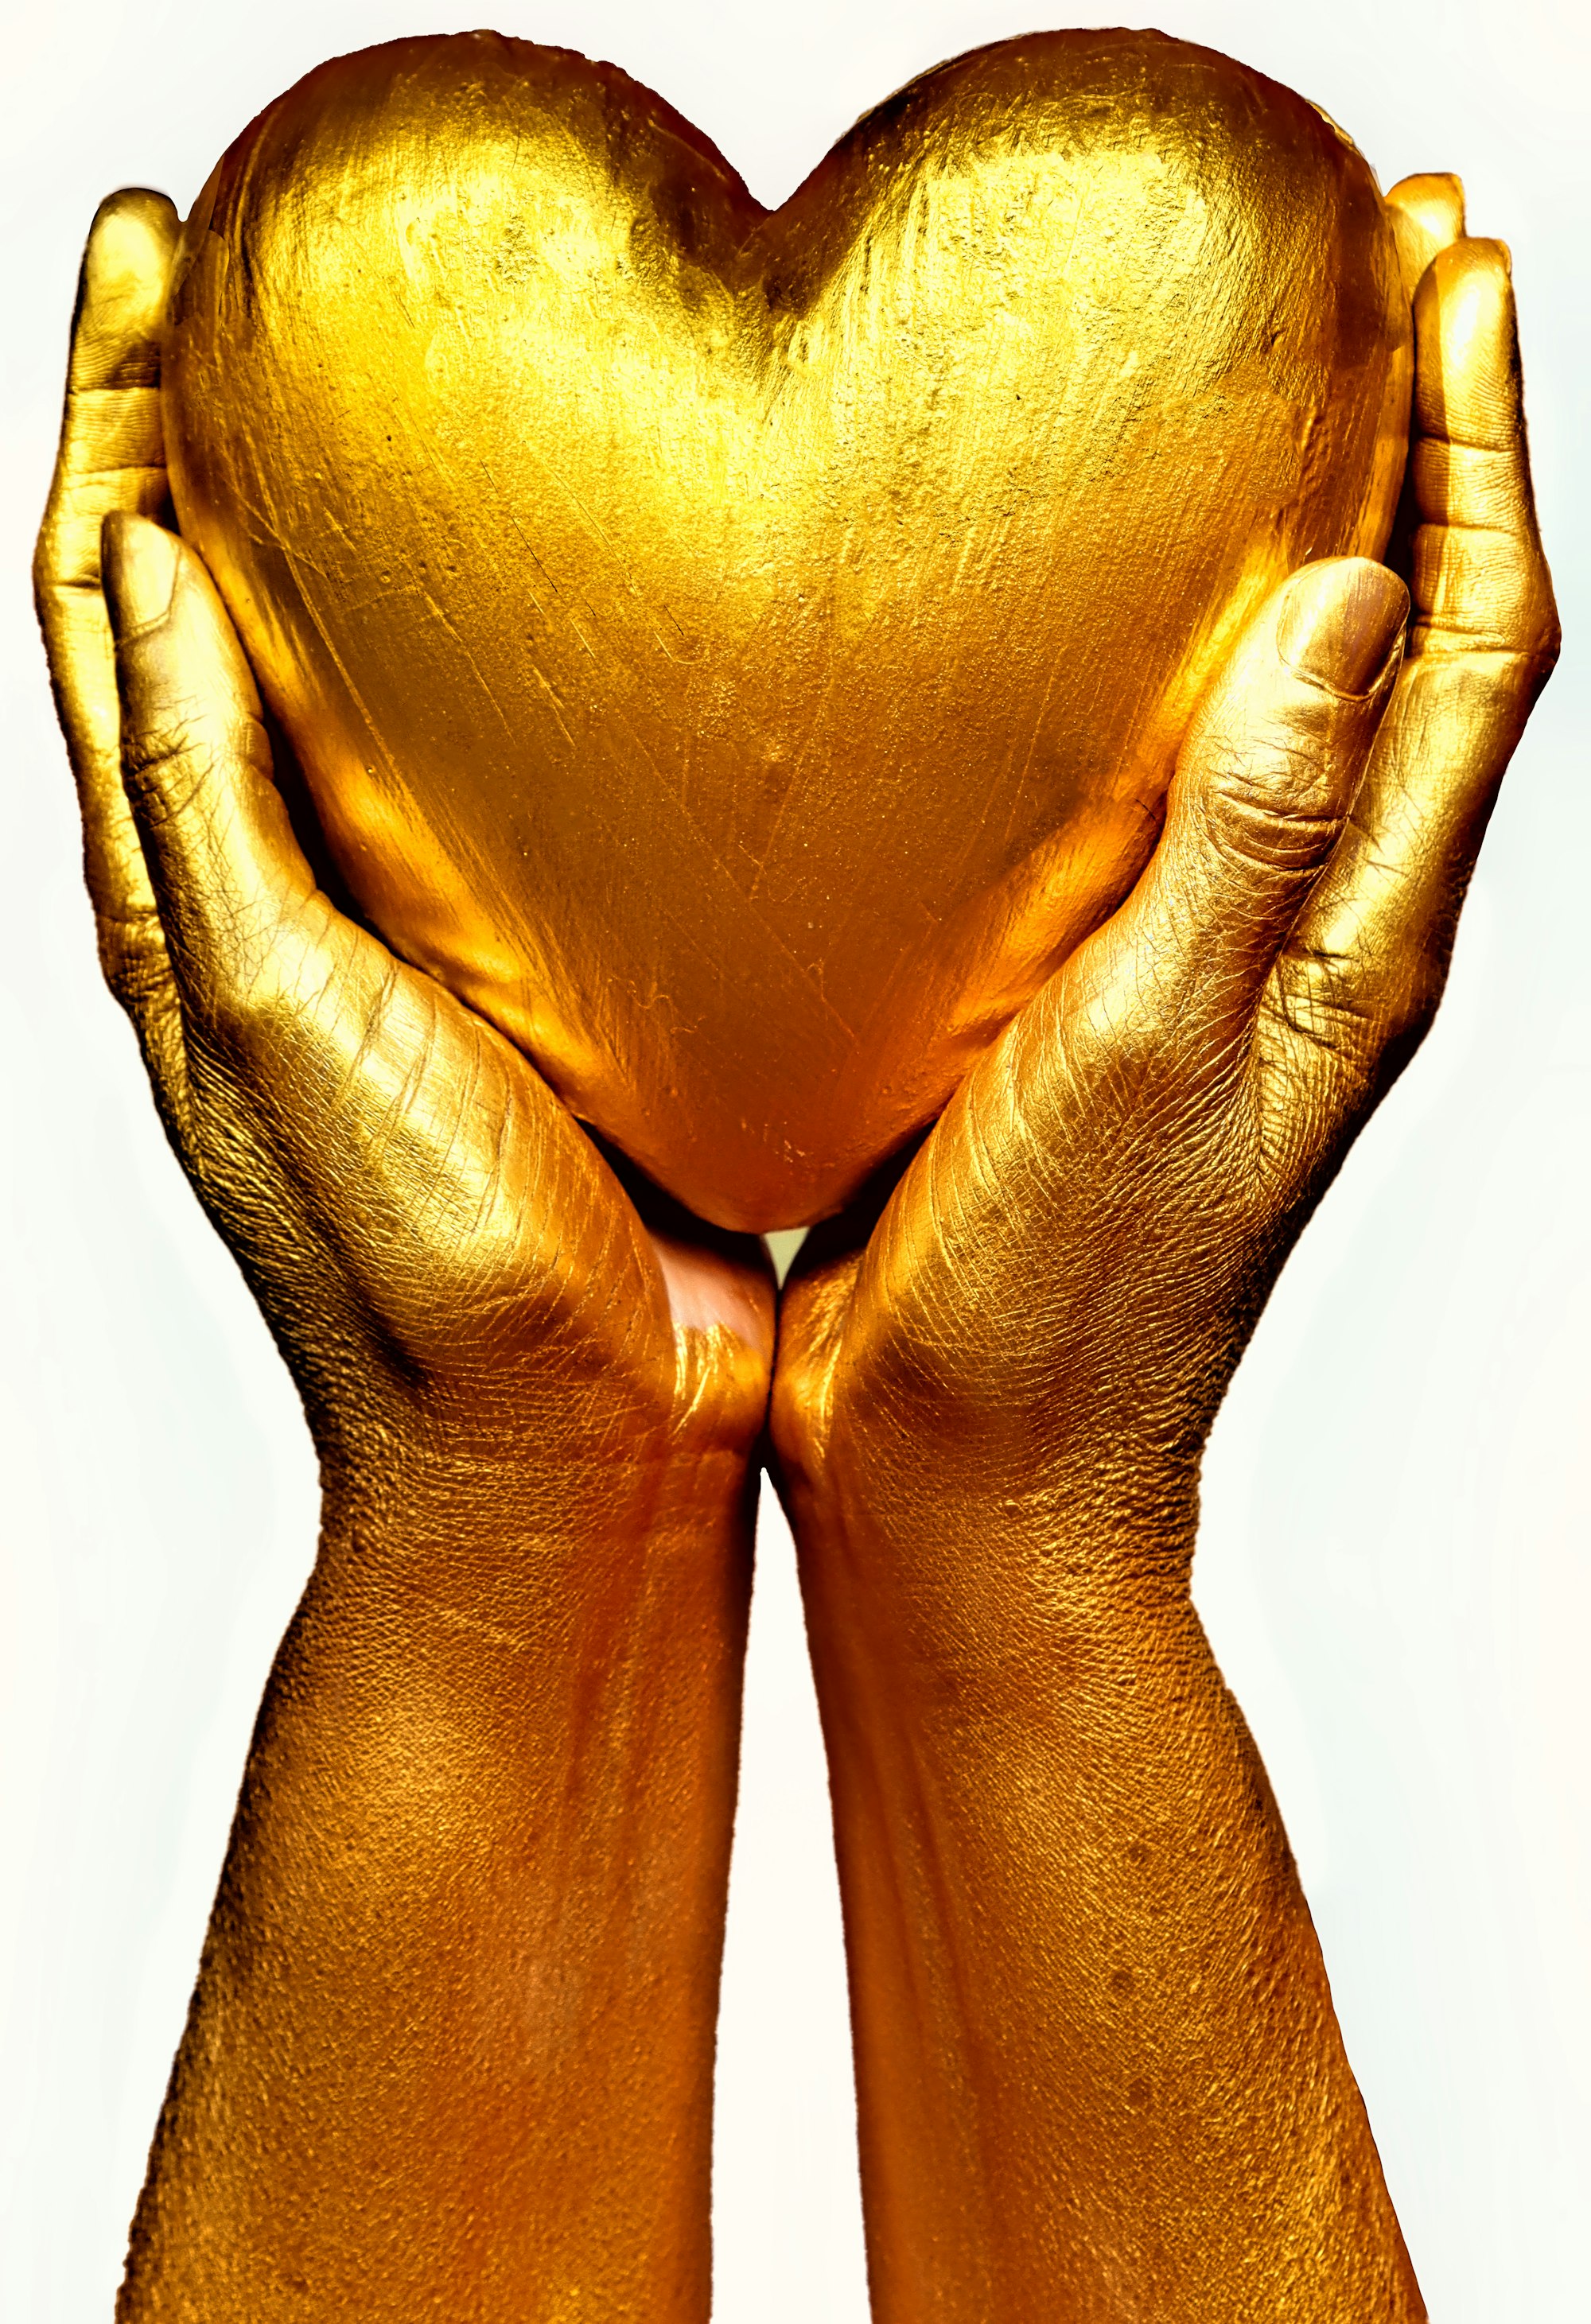 heart, two, gold, golden, yellow, trust, love, 2, art, assist, carry, confidence, faith, fingers, grey, hands, heart, helping, hold, human, love, support, trust, underarm, left, right